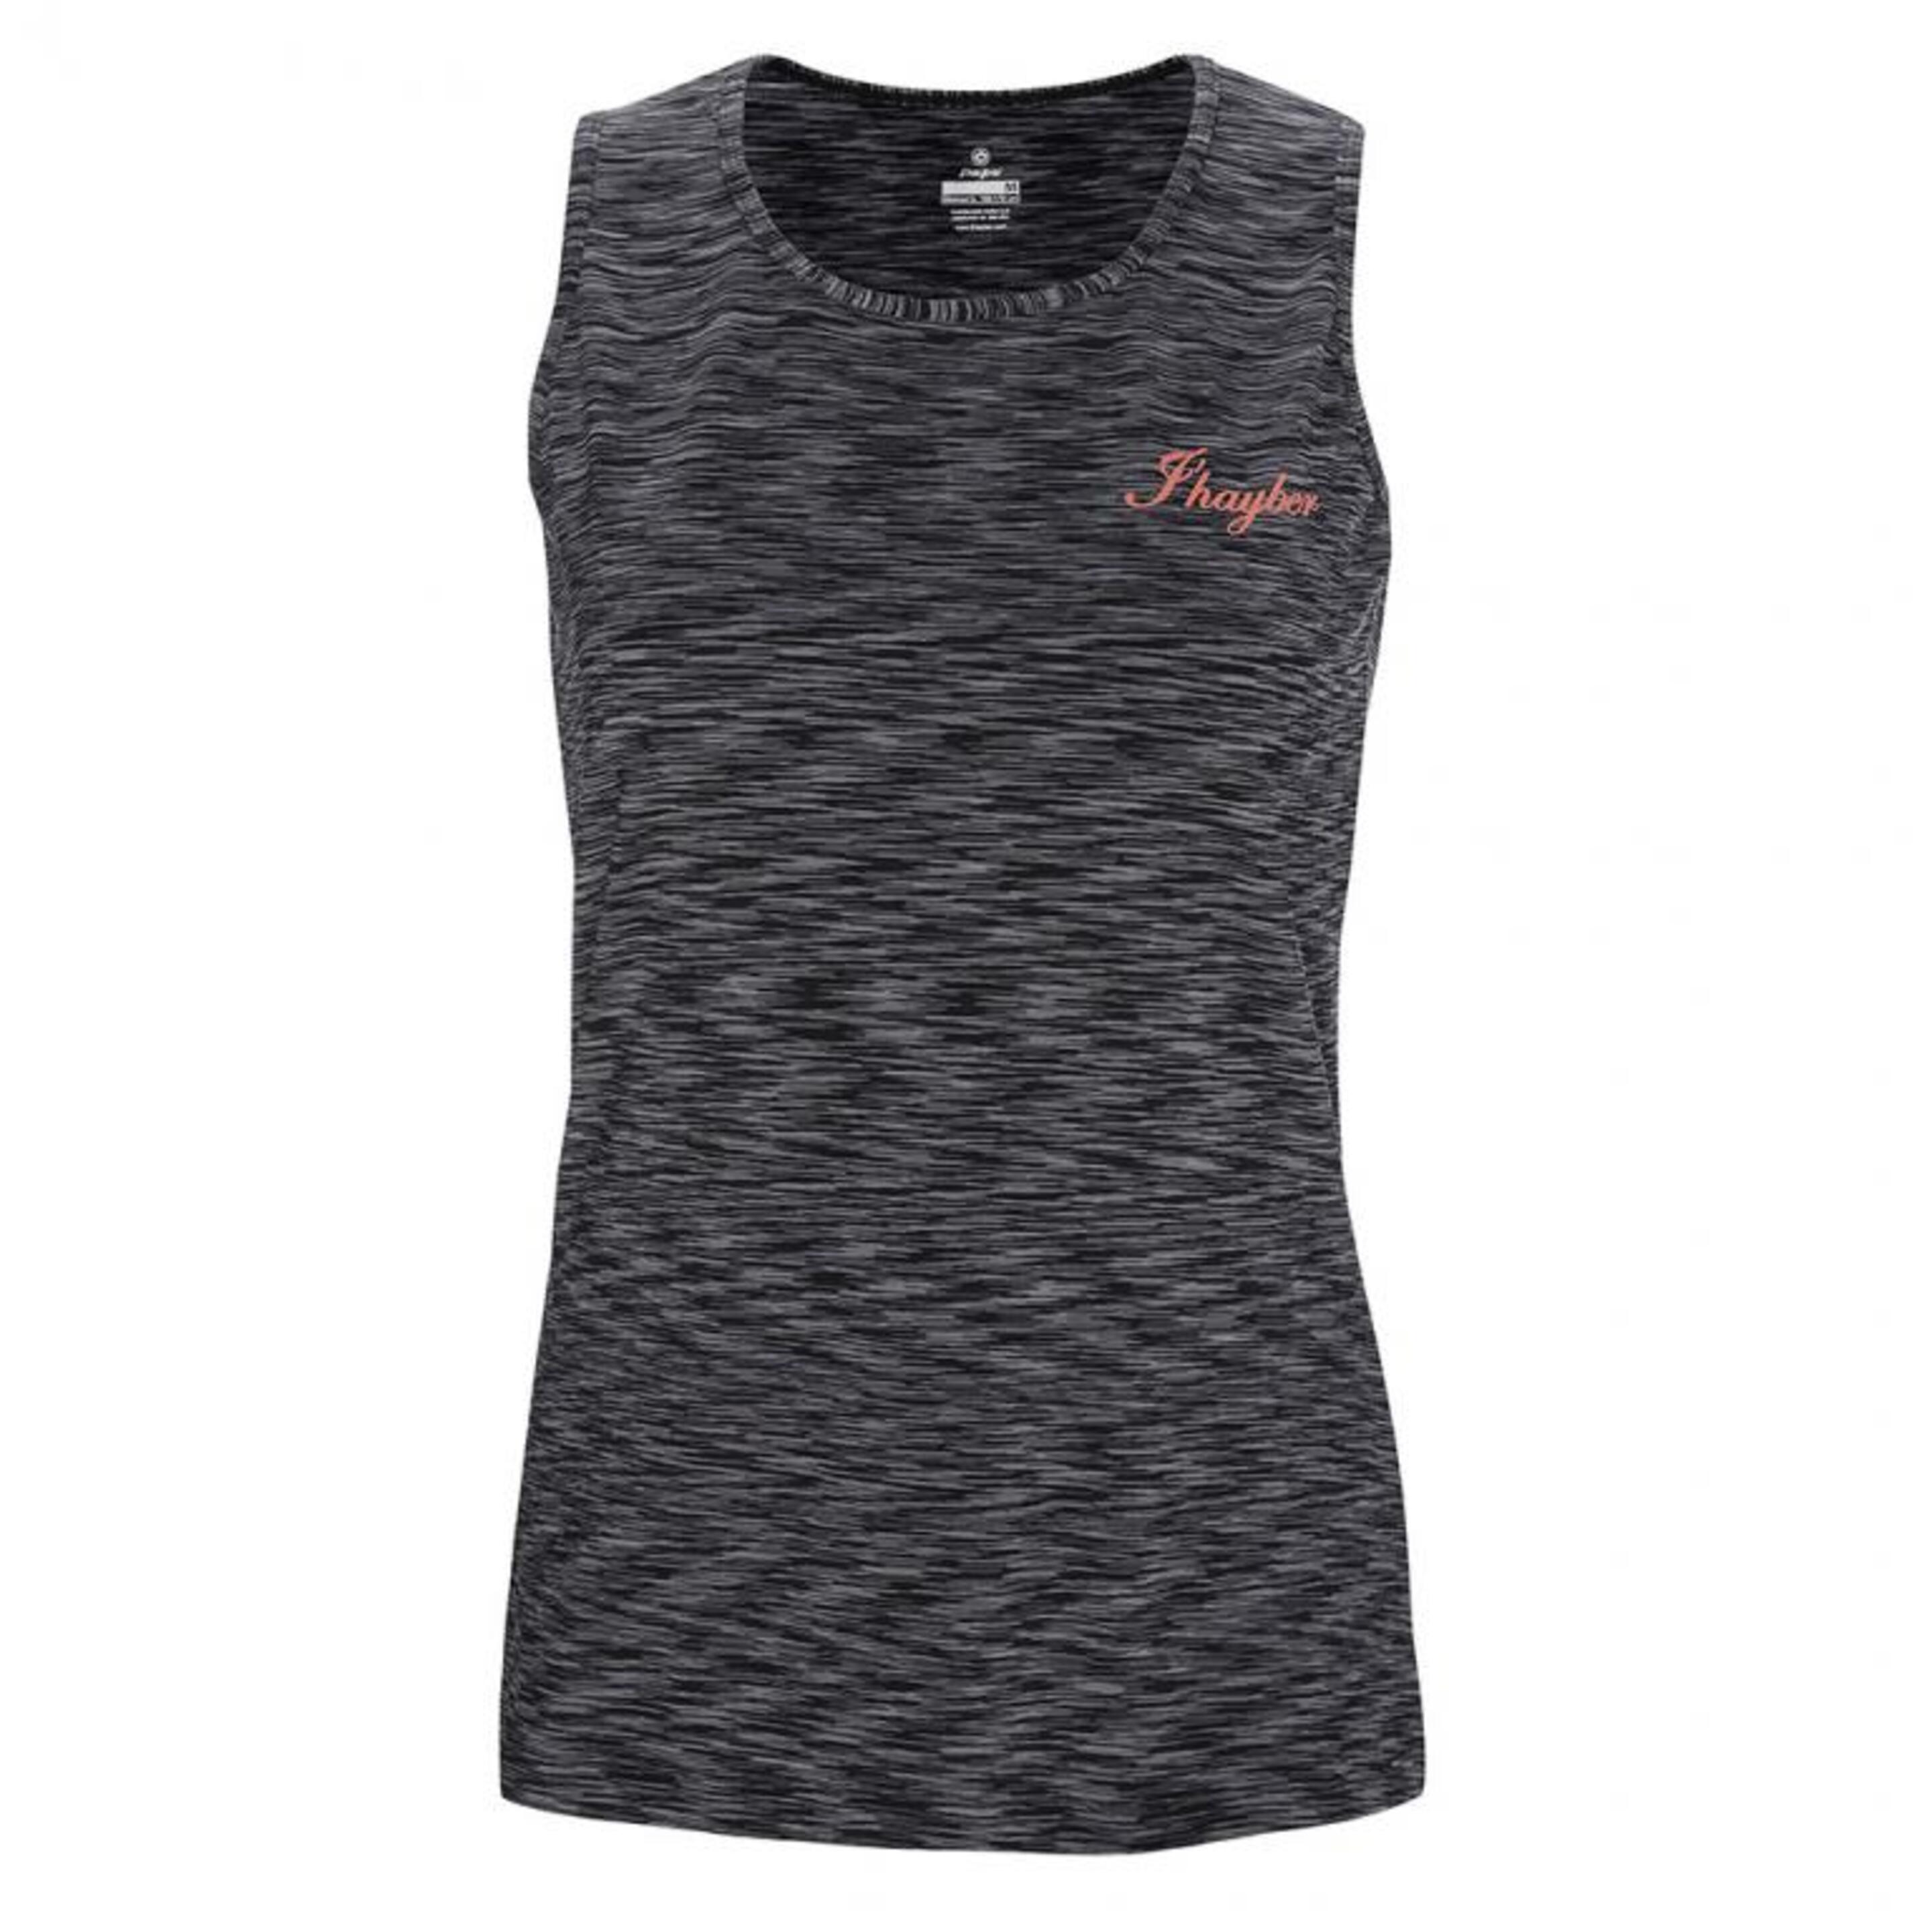 Camiseta Deportiva Ds3189 Outlet Mujer J'Hayber - negro - 